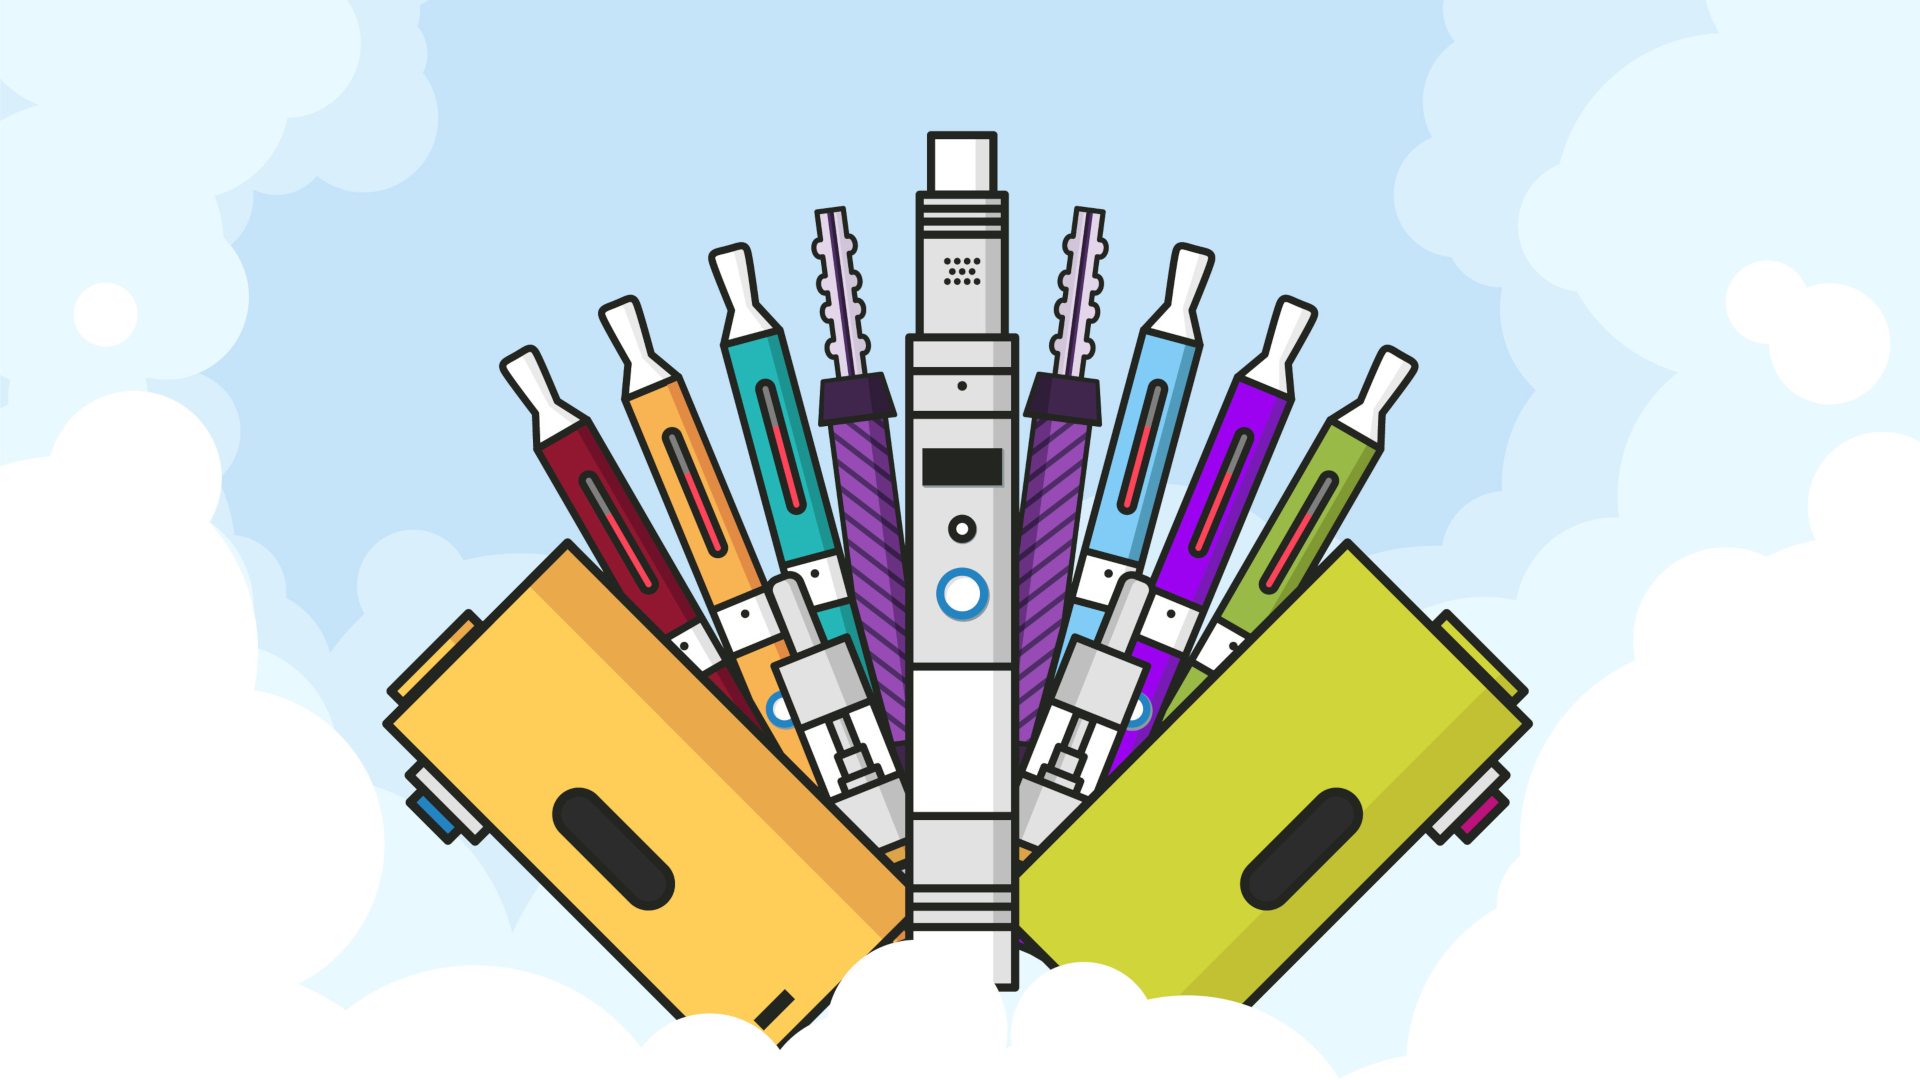 E-cigarettes are appealing to young people in a number of ways, one of which is their aesthetics. (Image: FlyIntoSpace/Shutterstock)